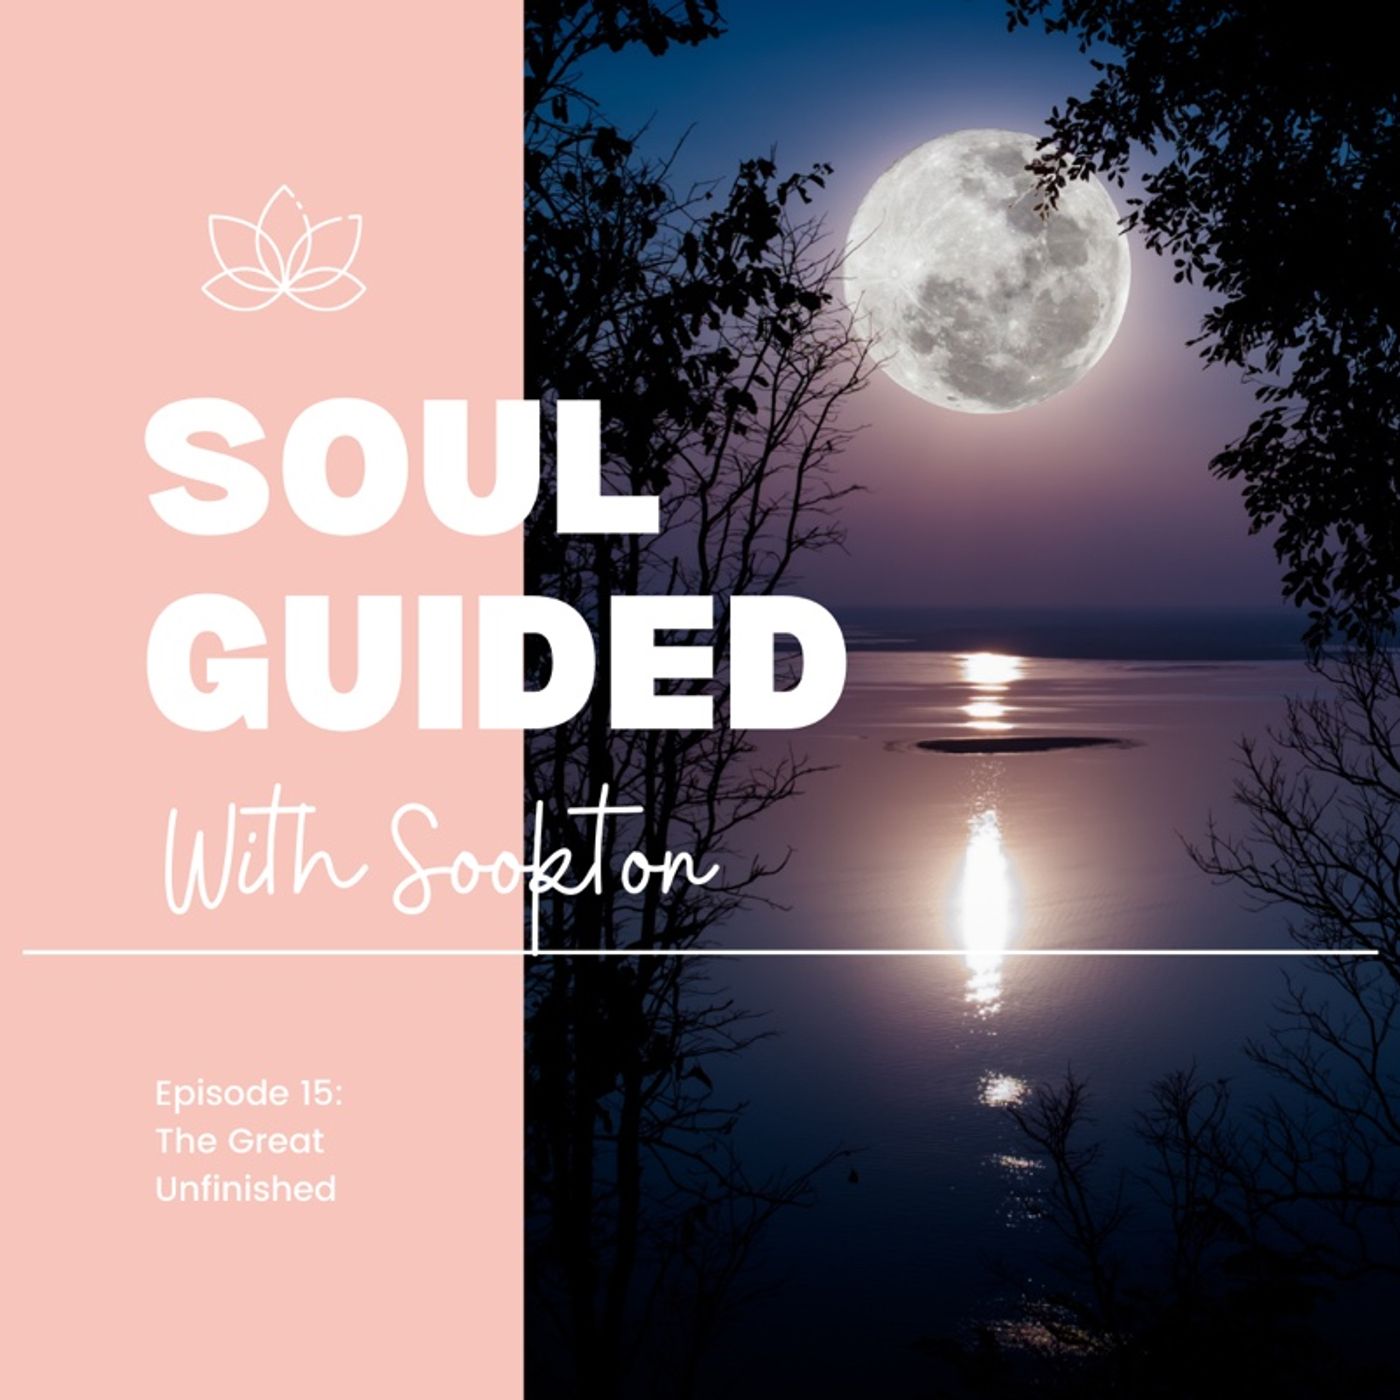 Soul Guided With Sookton: Harness the Power of the Full Moon